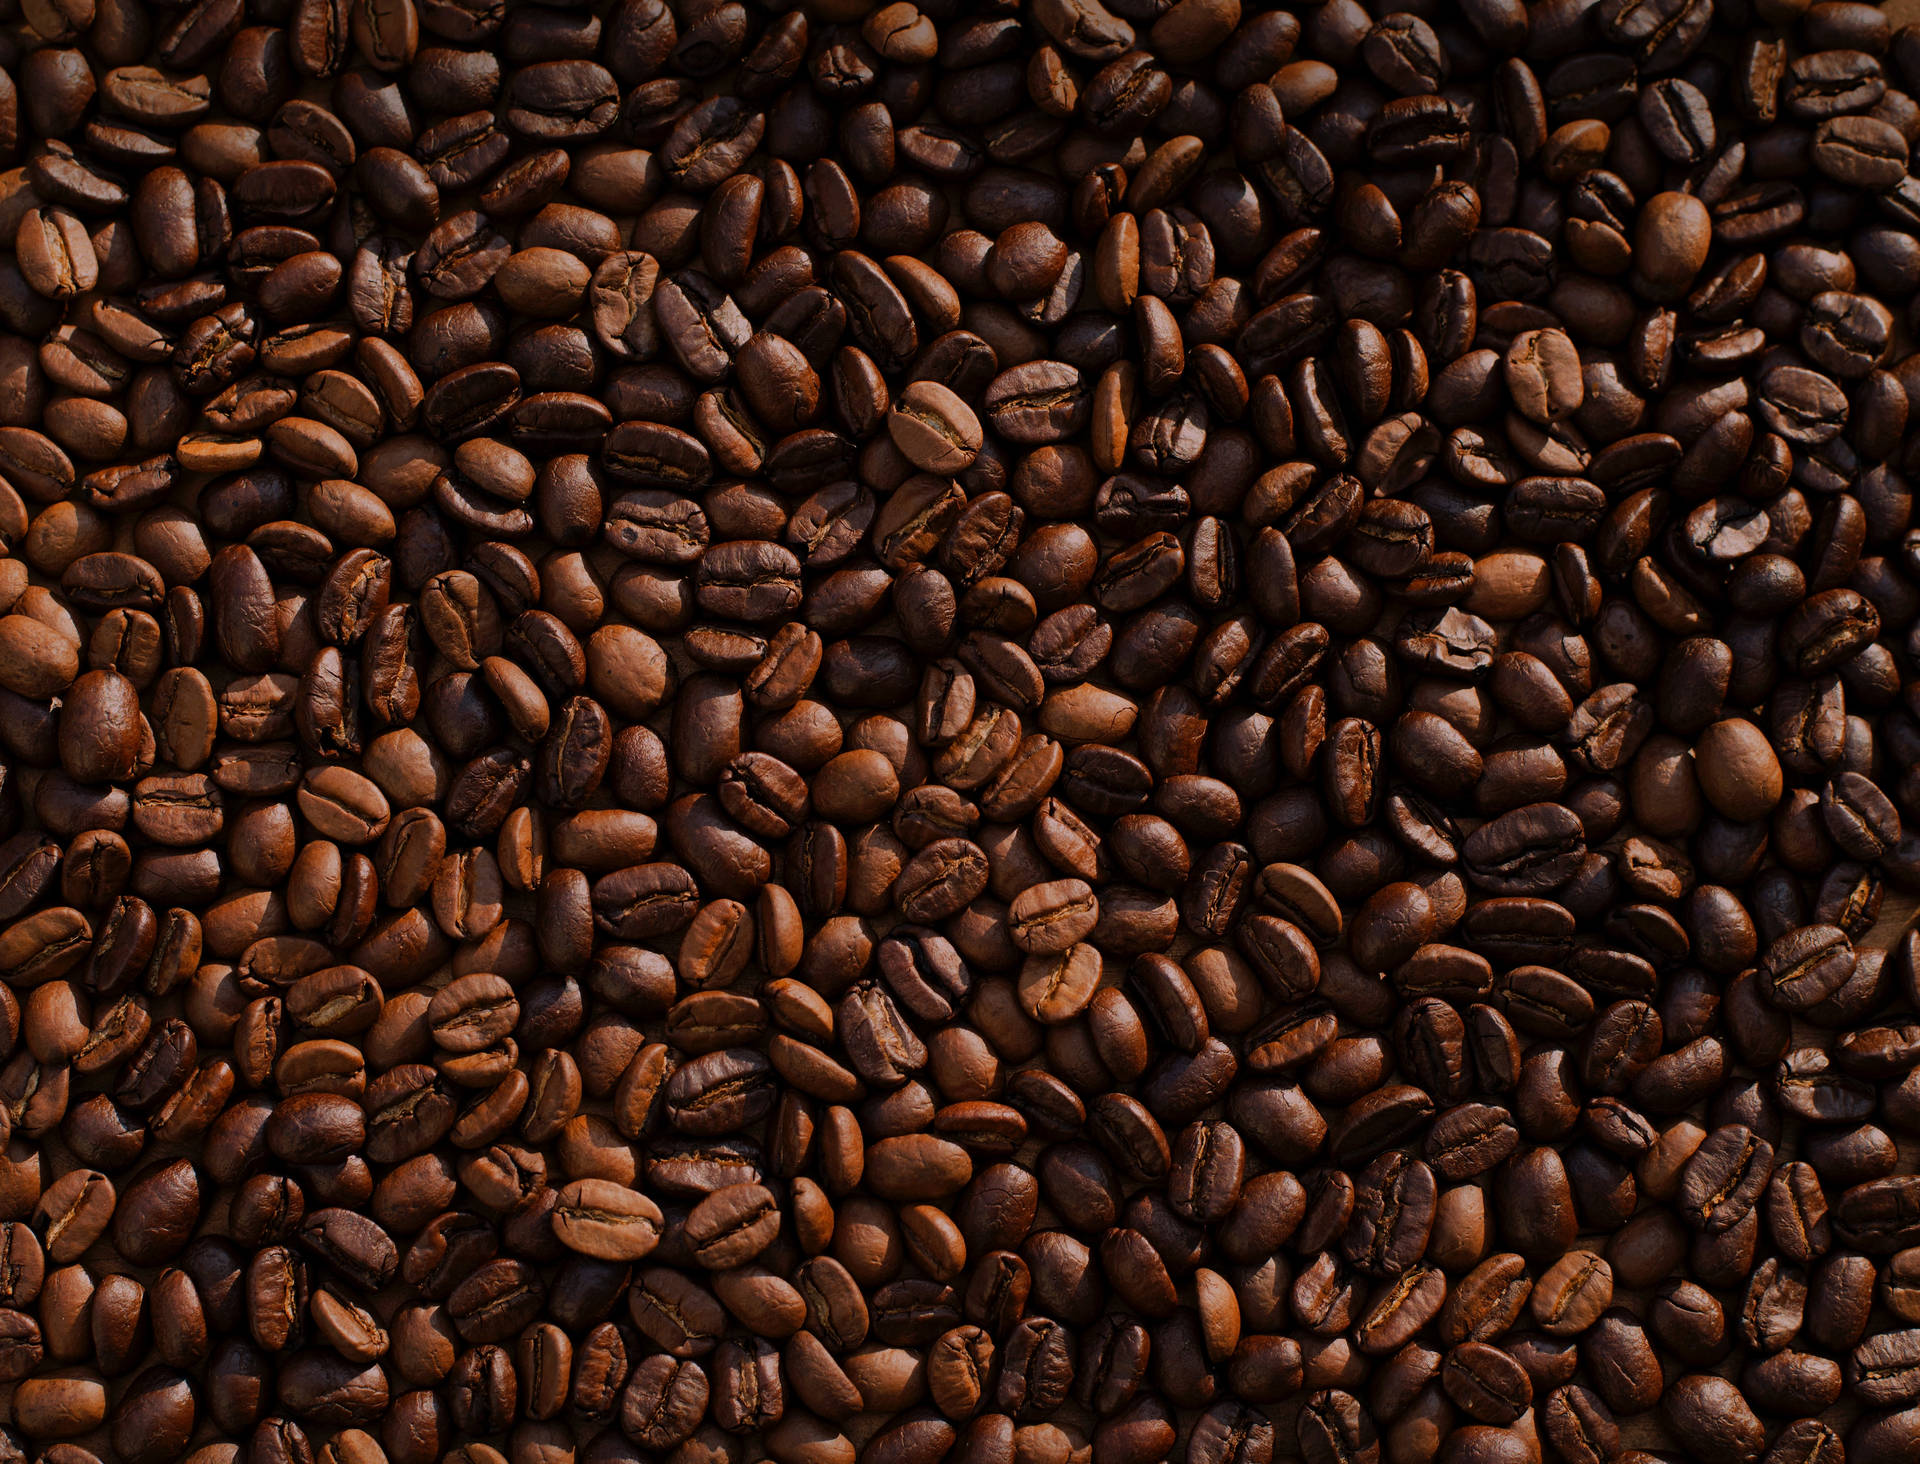 Refreshing aroma of coffee beans Wallpaper